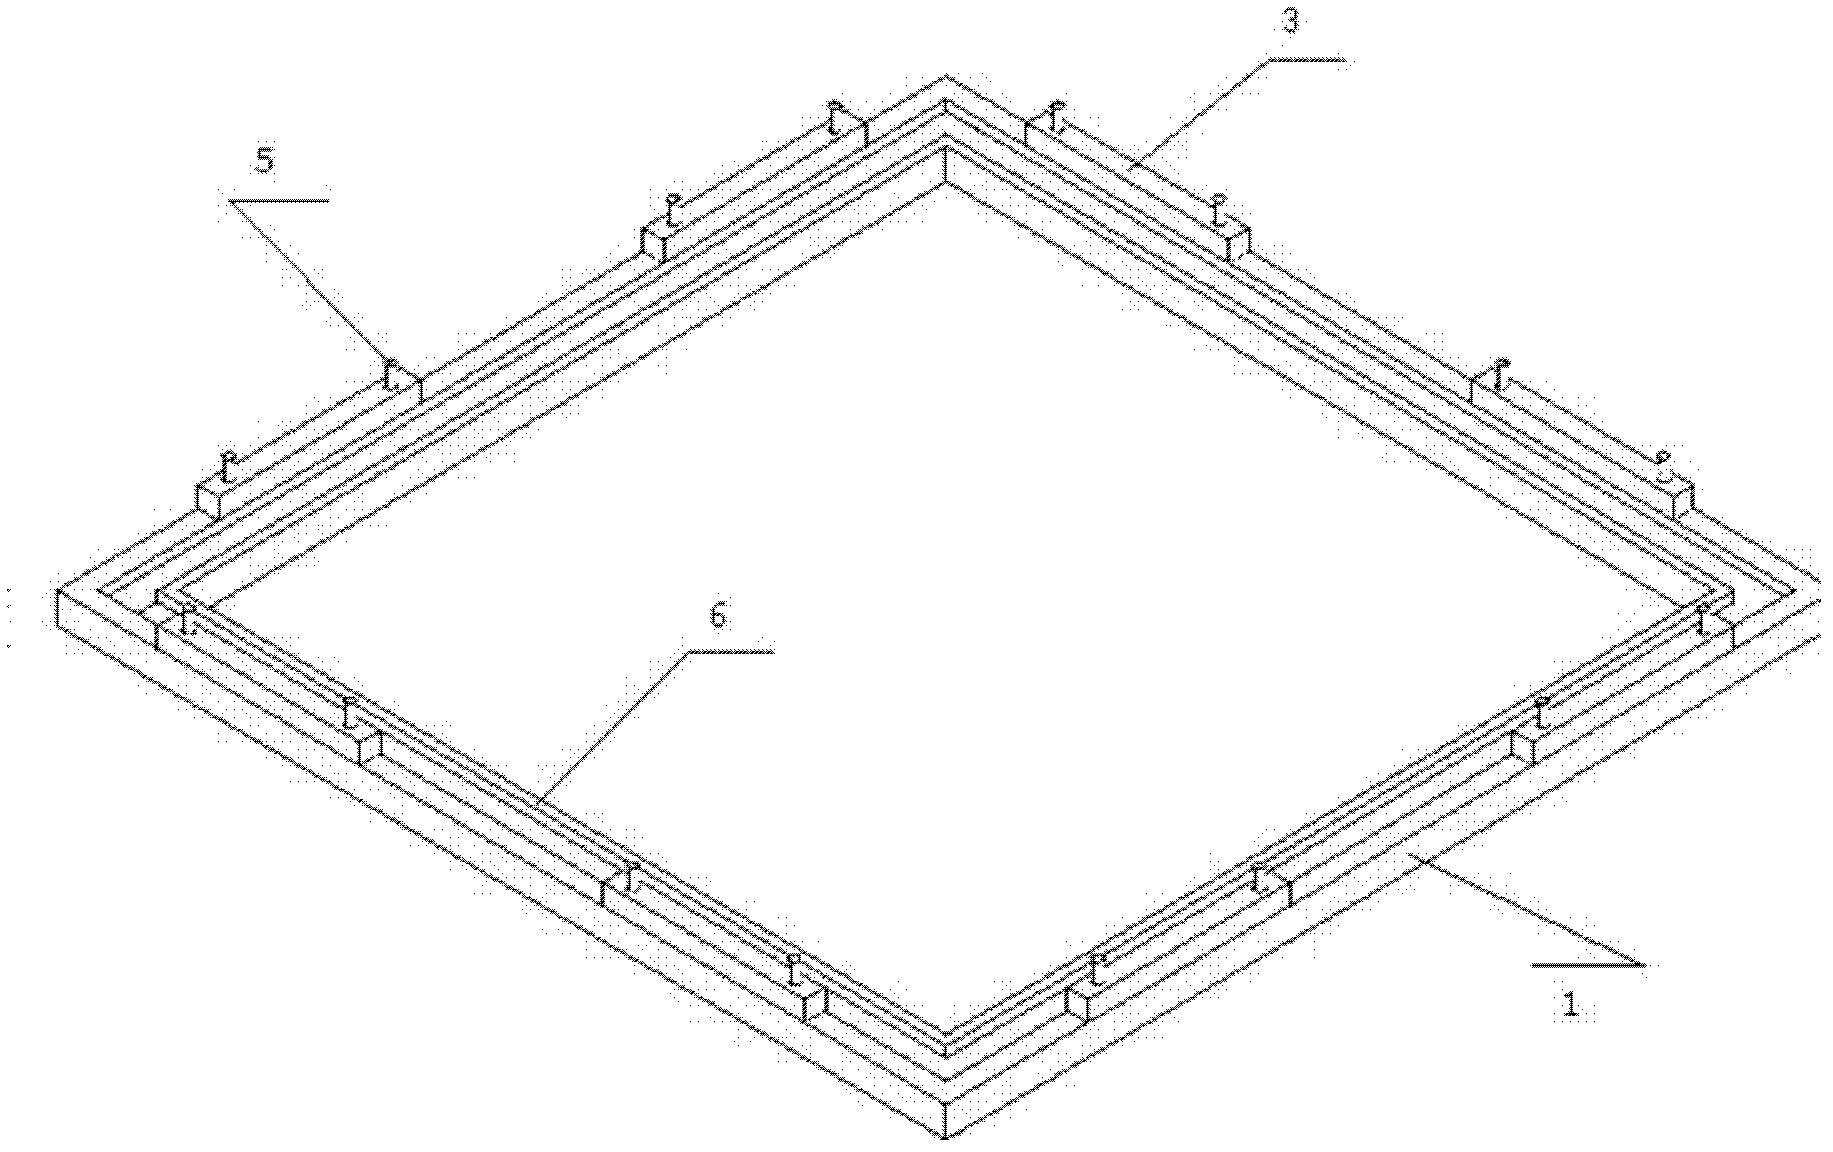 Method for improving optical element additional surface shape caused by force of gravity, and clamping system thereof